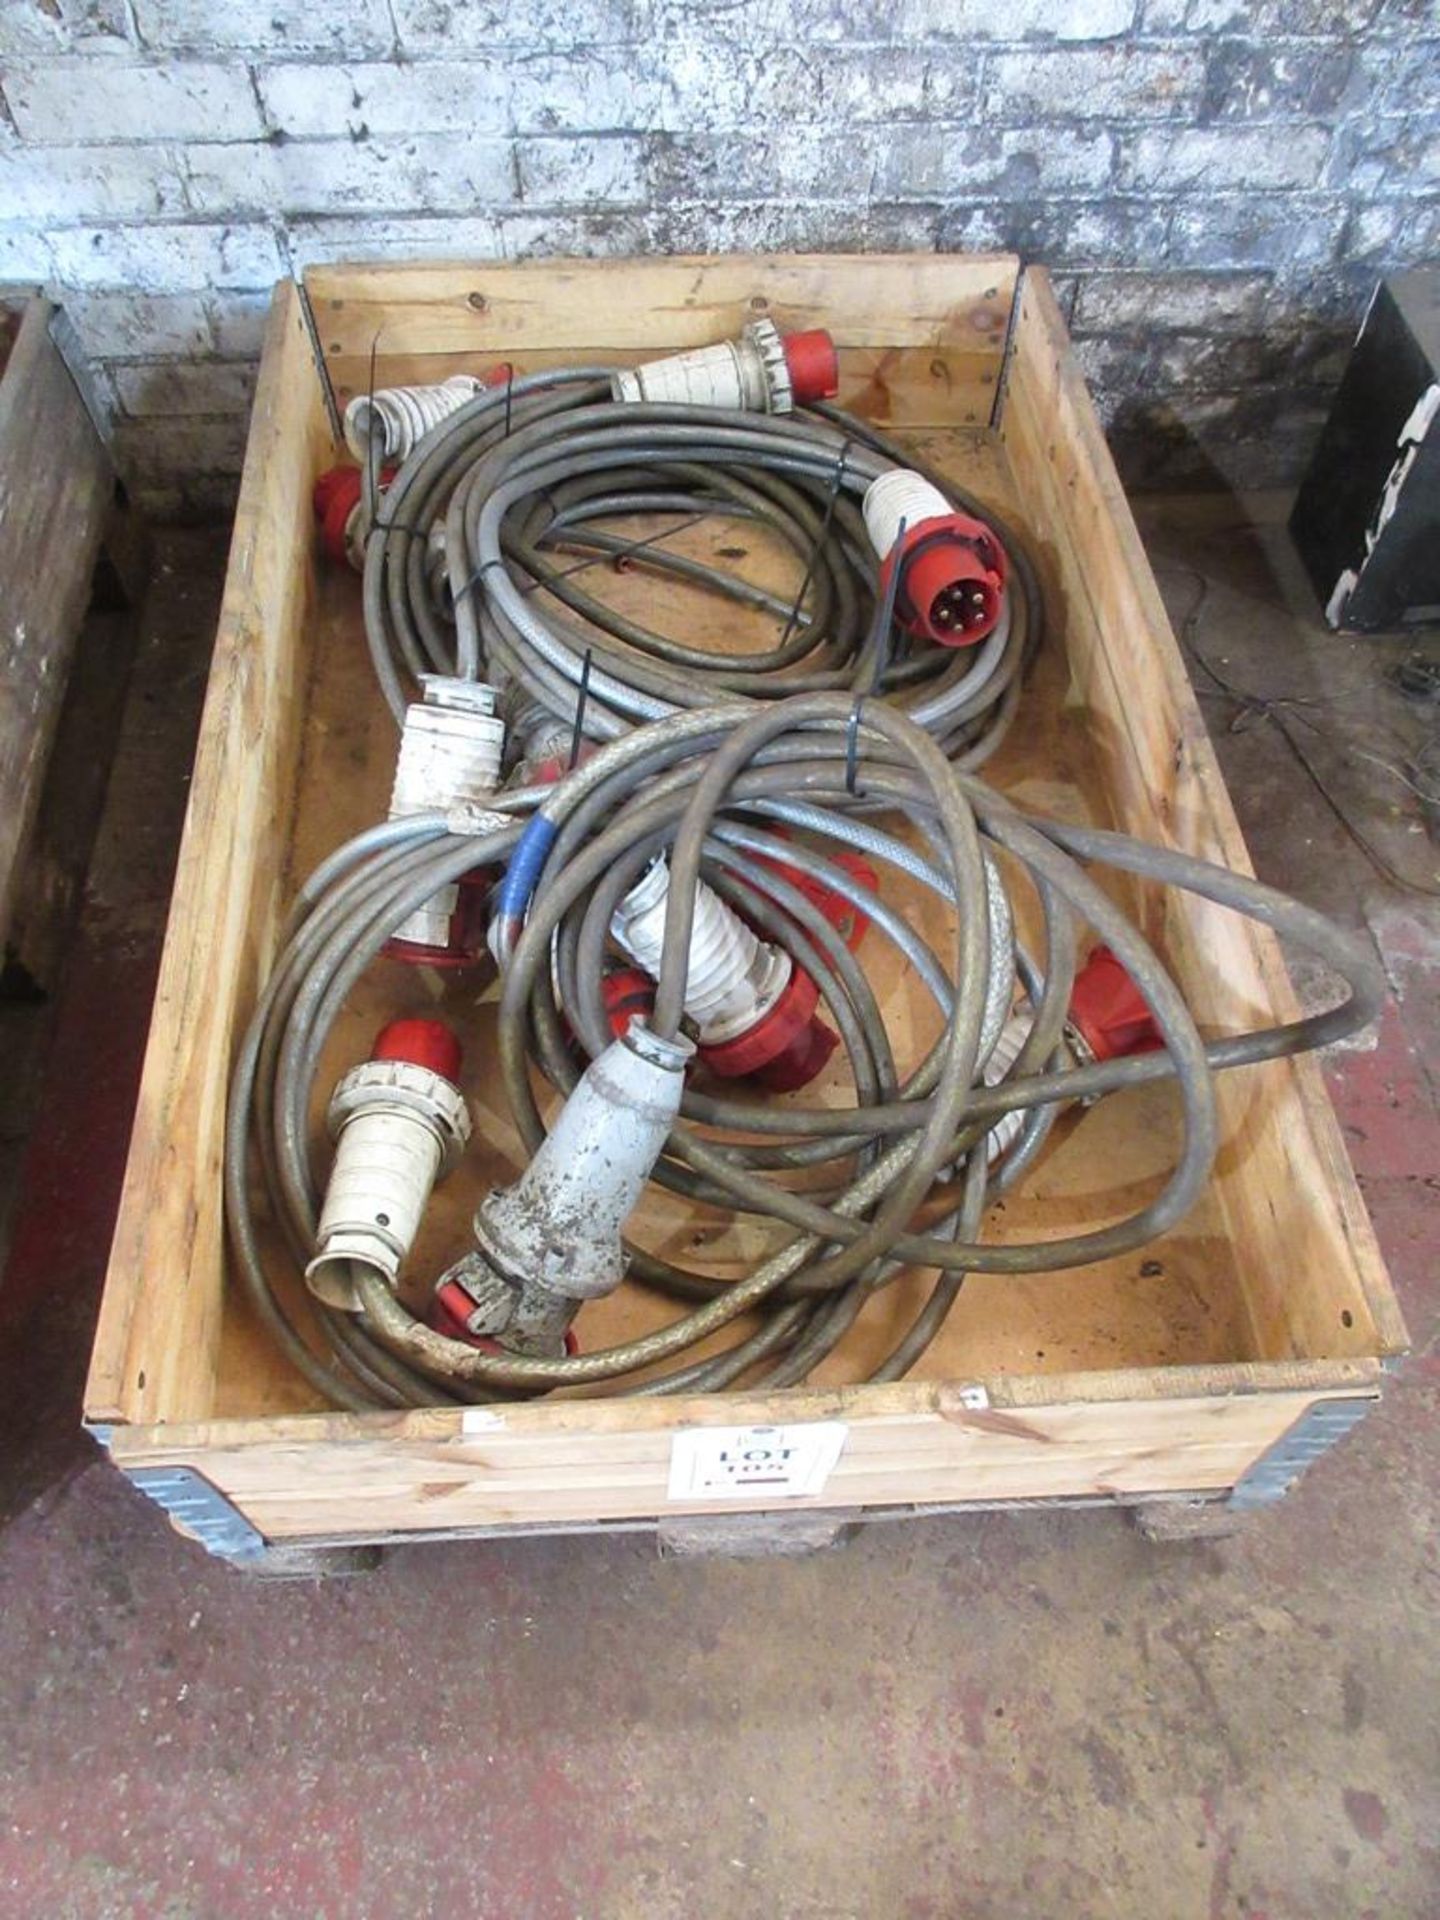 Quantity of 415V extension leads